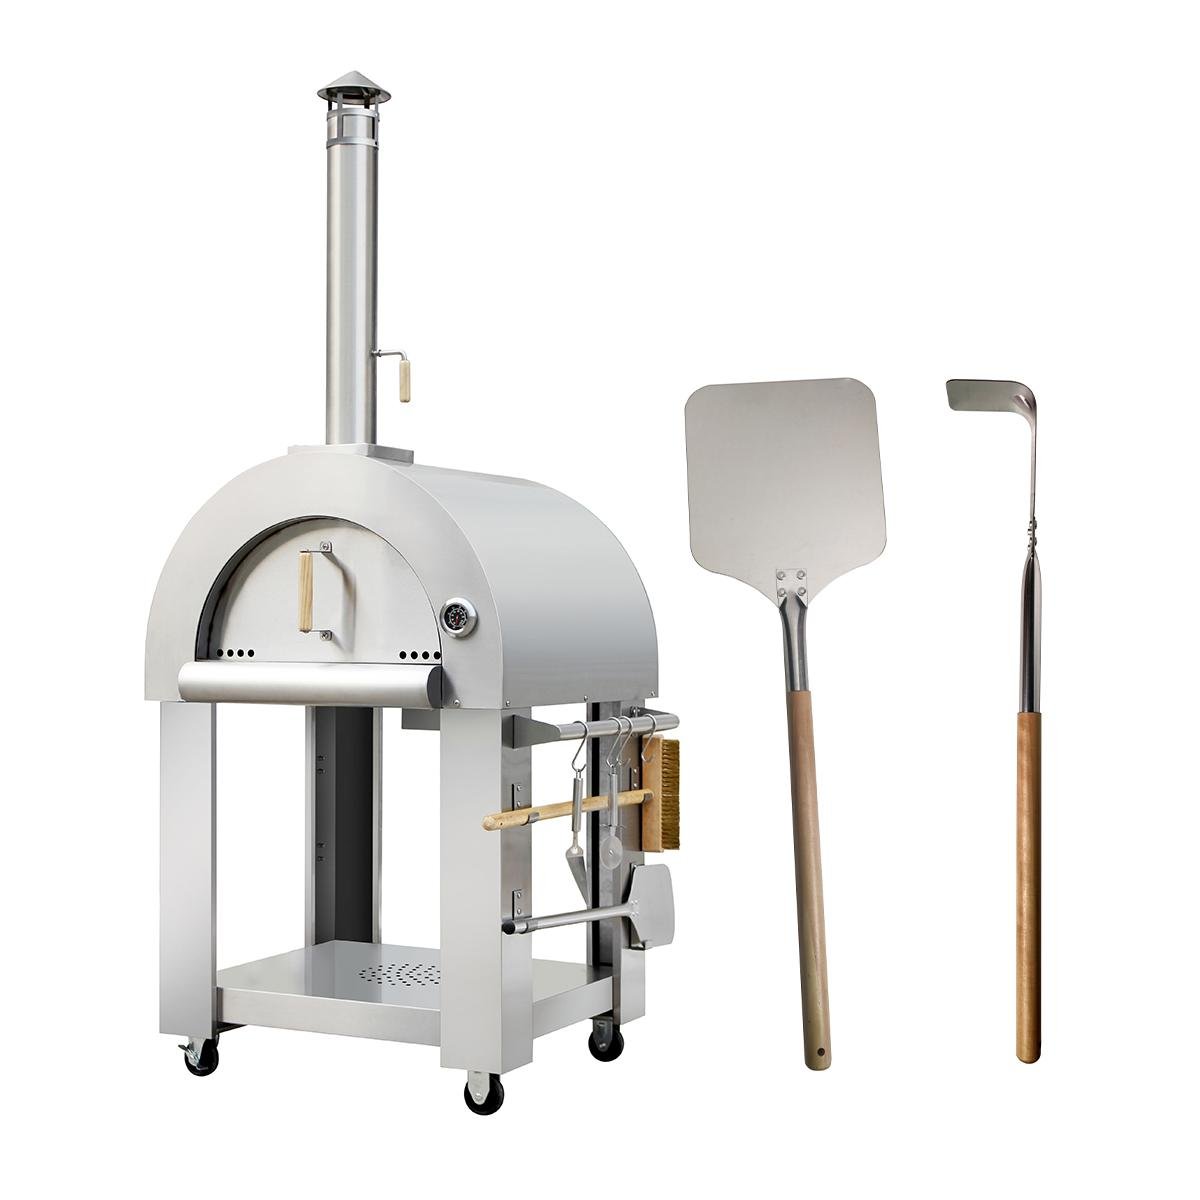 Hyxion factory Best seller High-end profession pizza oven 2